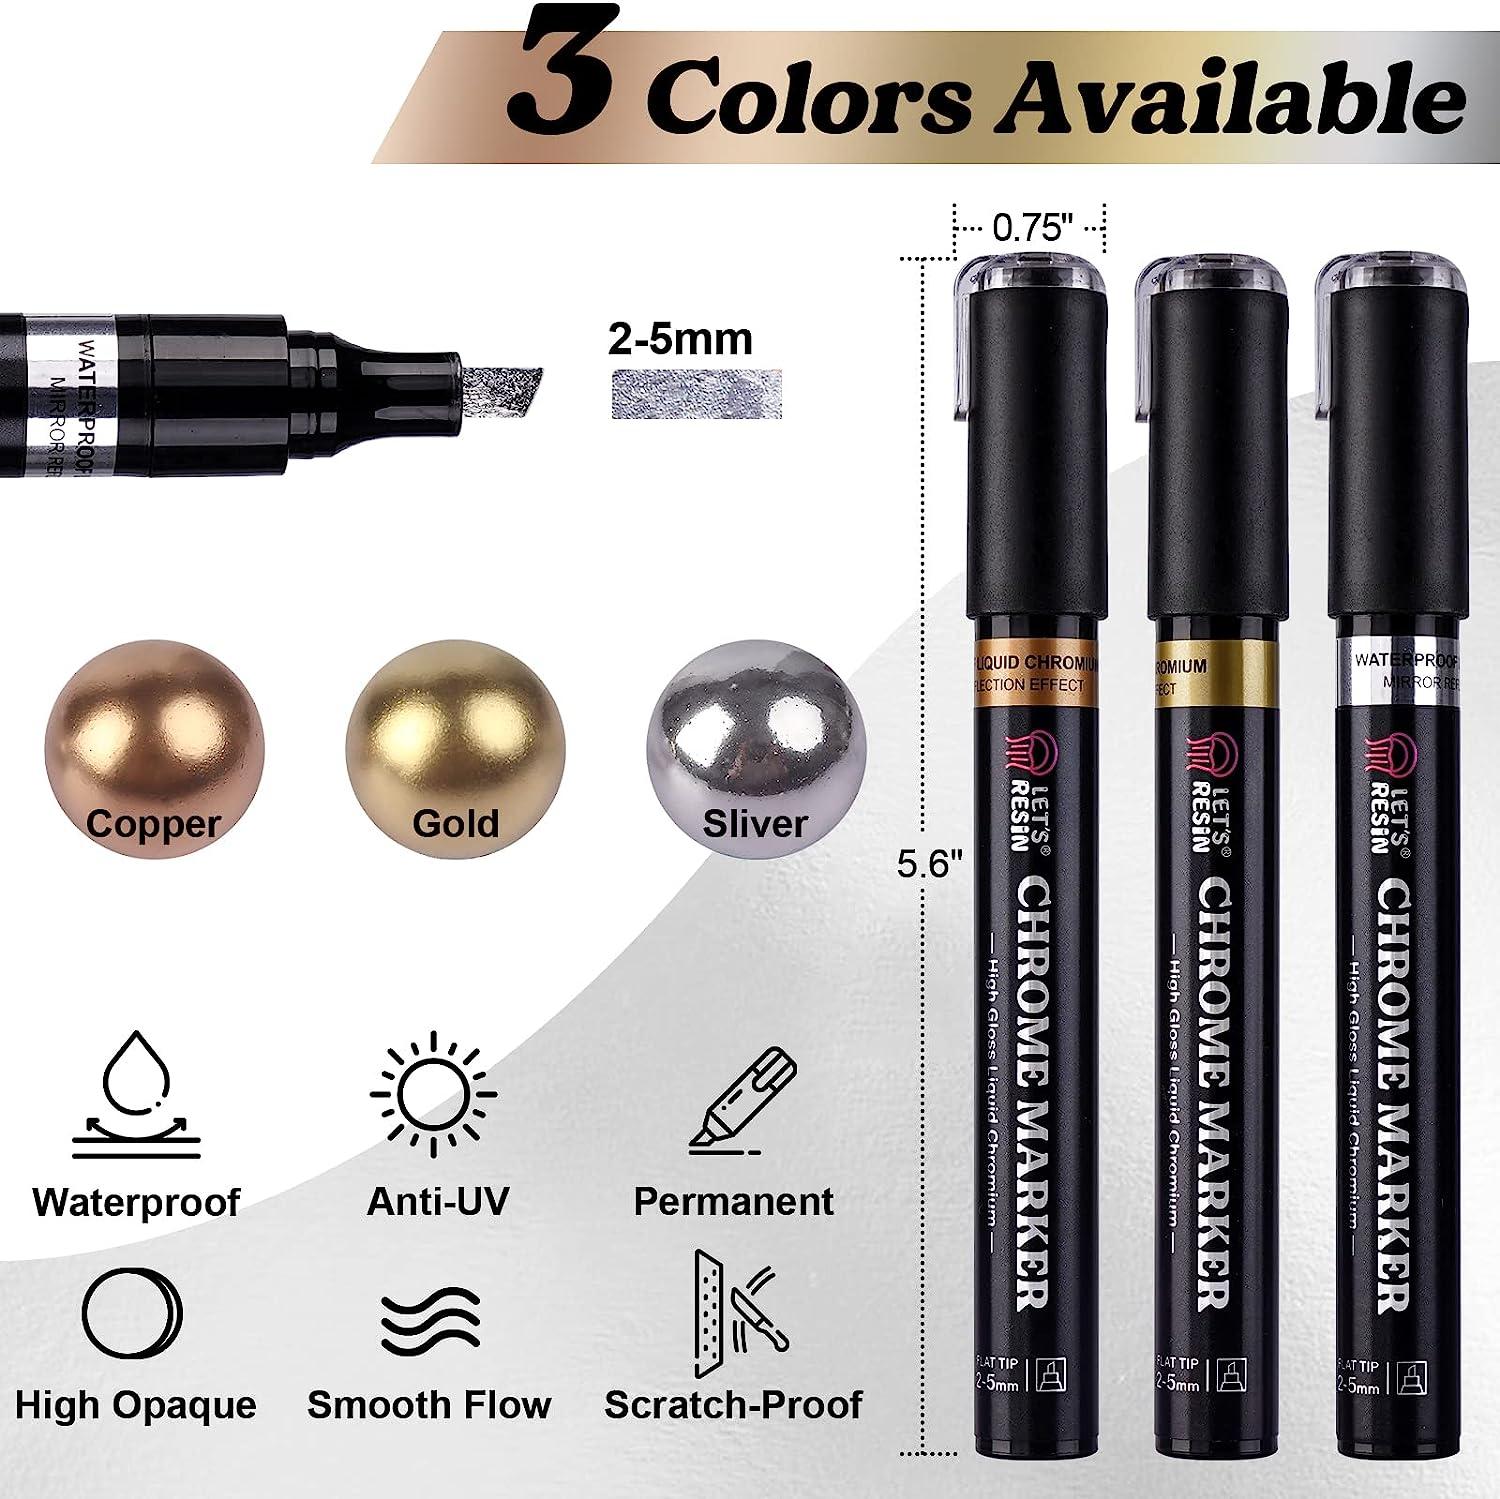 LET'S RESIN Liquid Mirror Chrome Markers,3 Colors Epoxy Resin Tools, 2-5mm  Larger Application Area, Reflective Gloss Metallic Markers, Resin Supplies  for Coloring, Stroke, Painting, DIY Craft 3pcs Chrome Markers